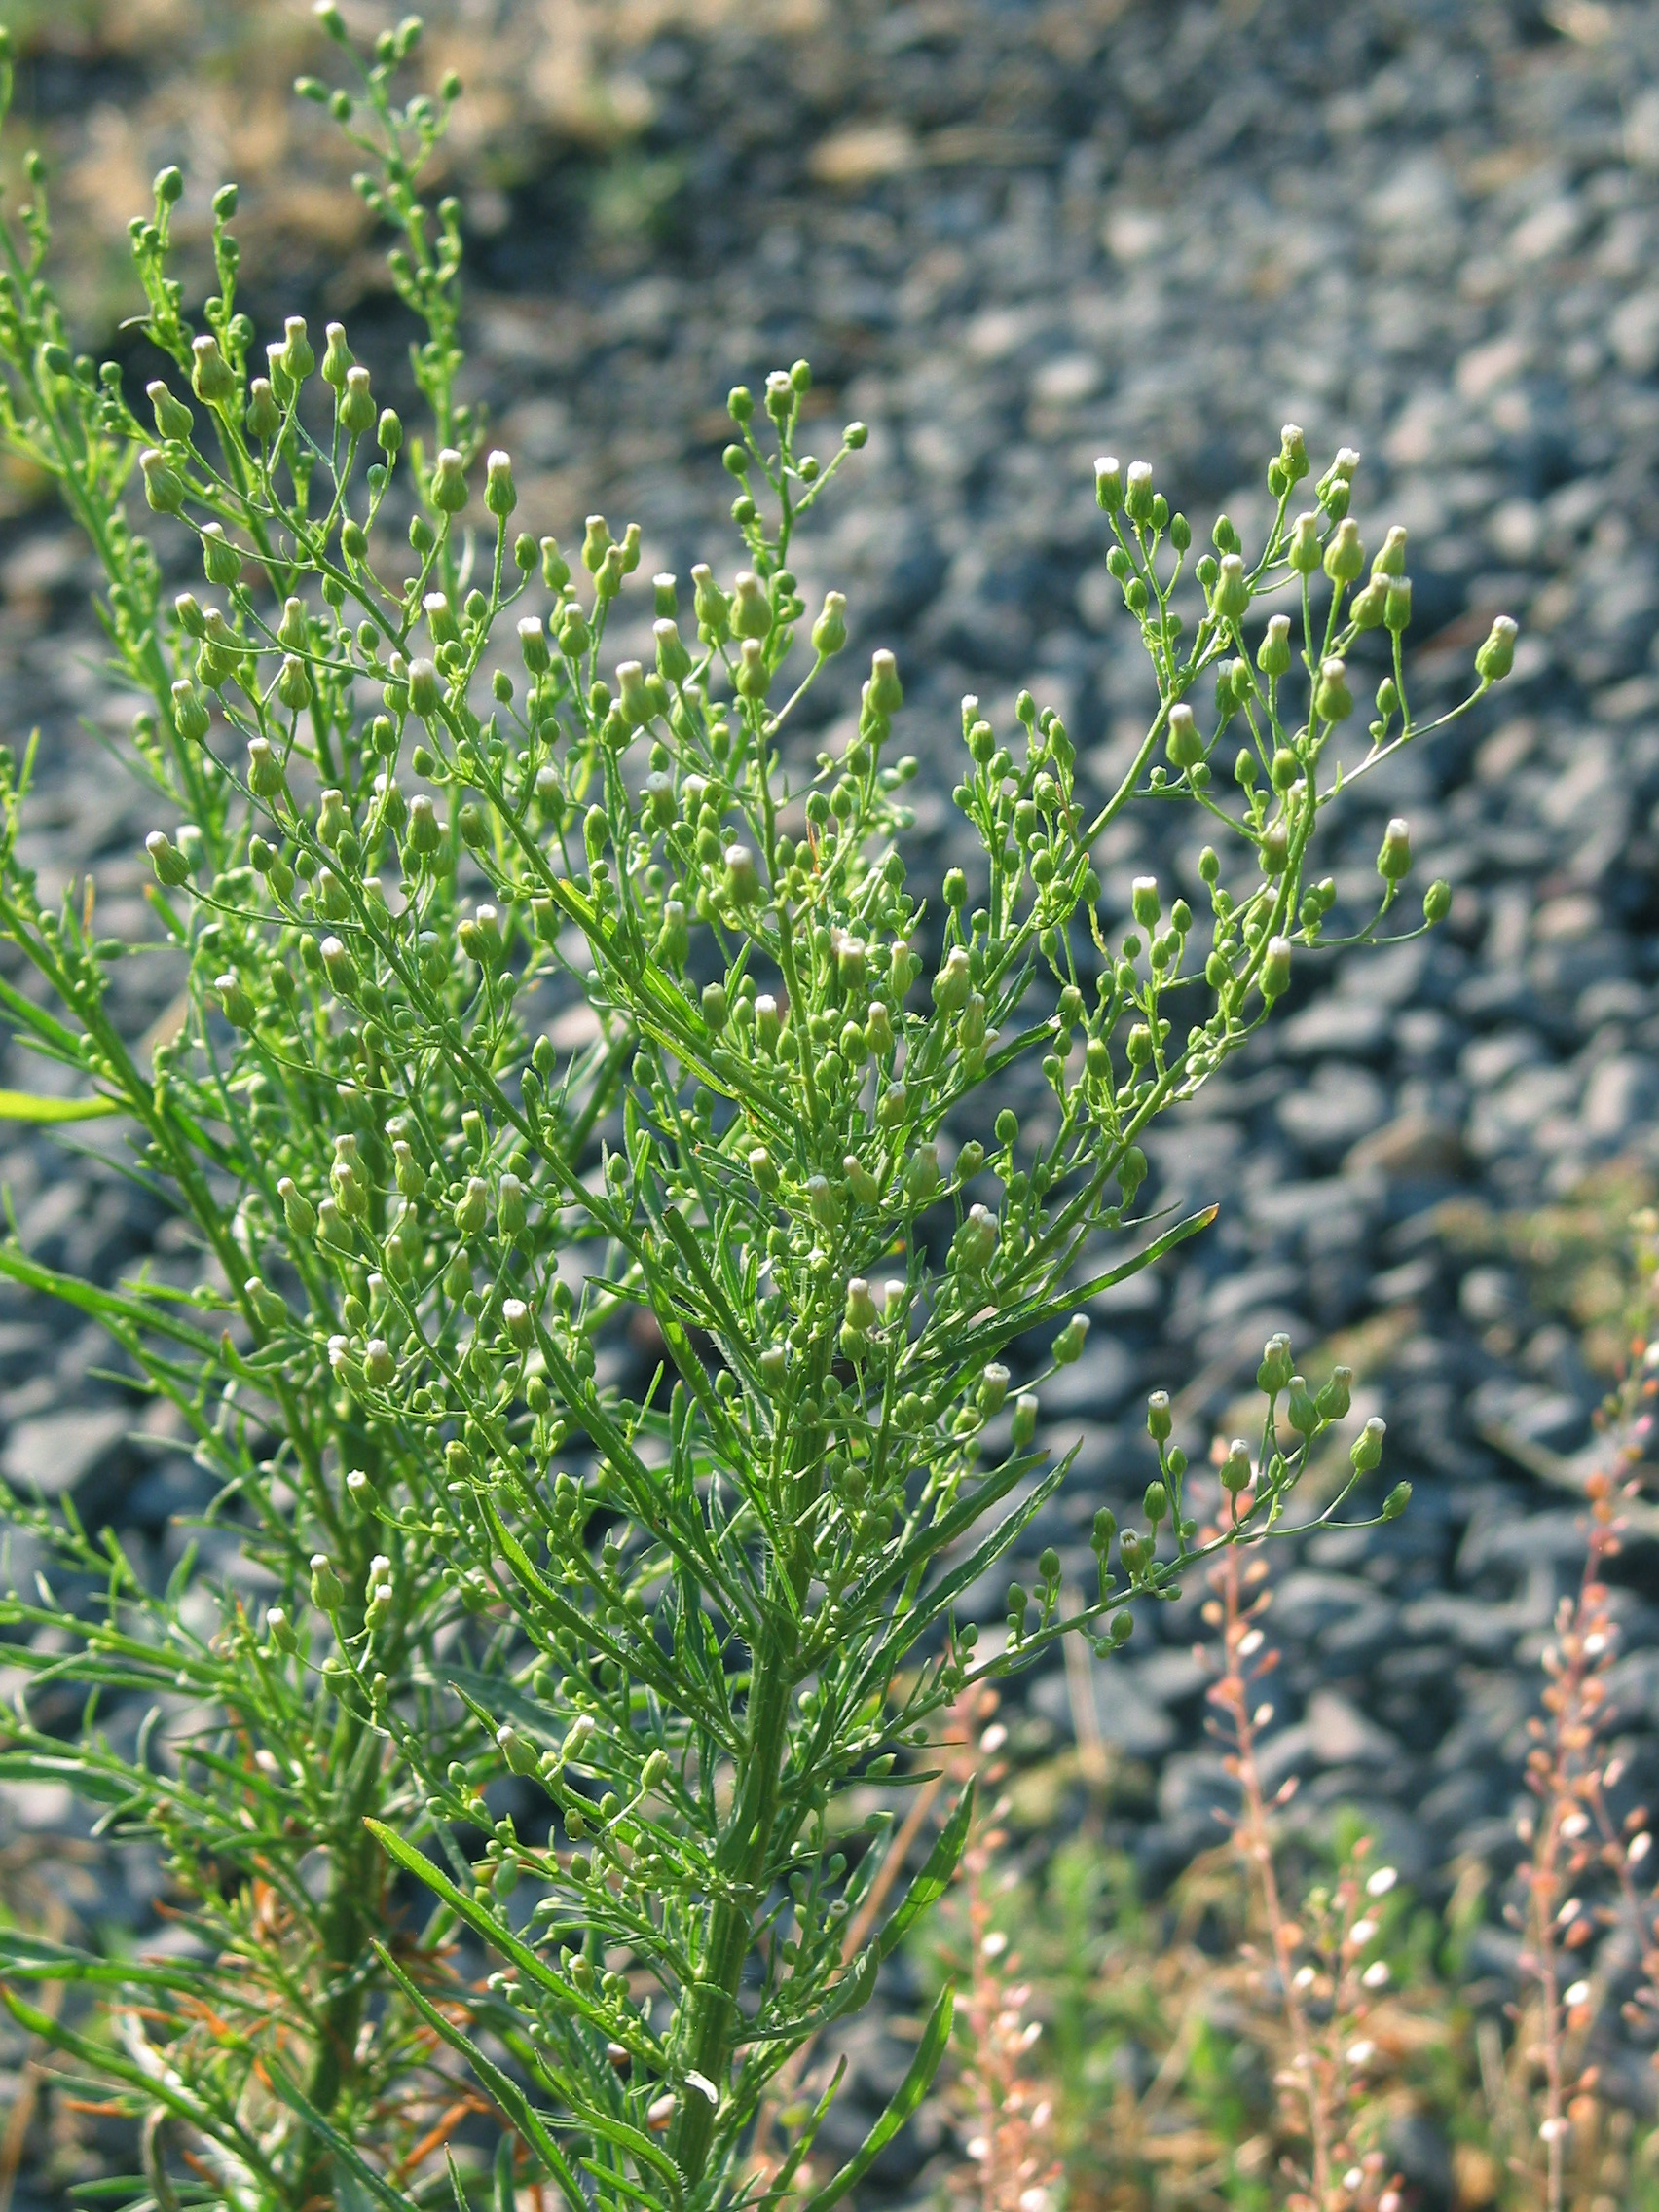 horseweed (Conyza canadensis)